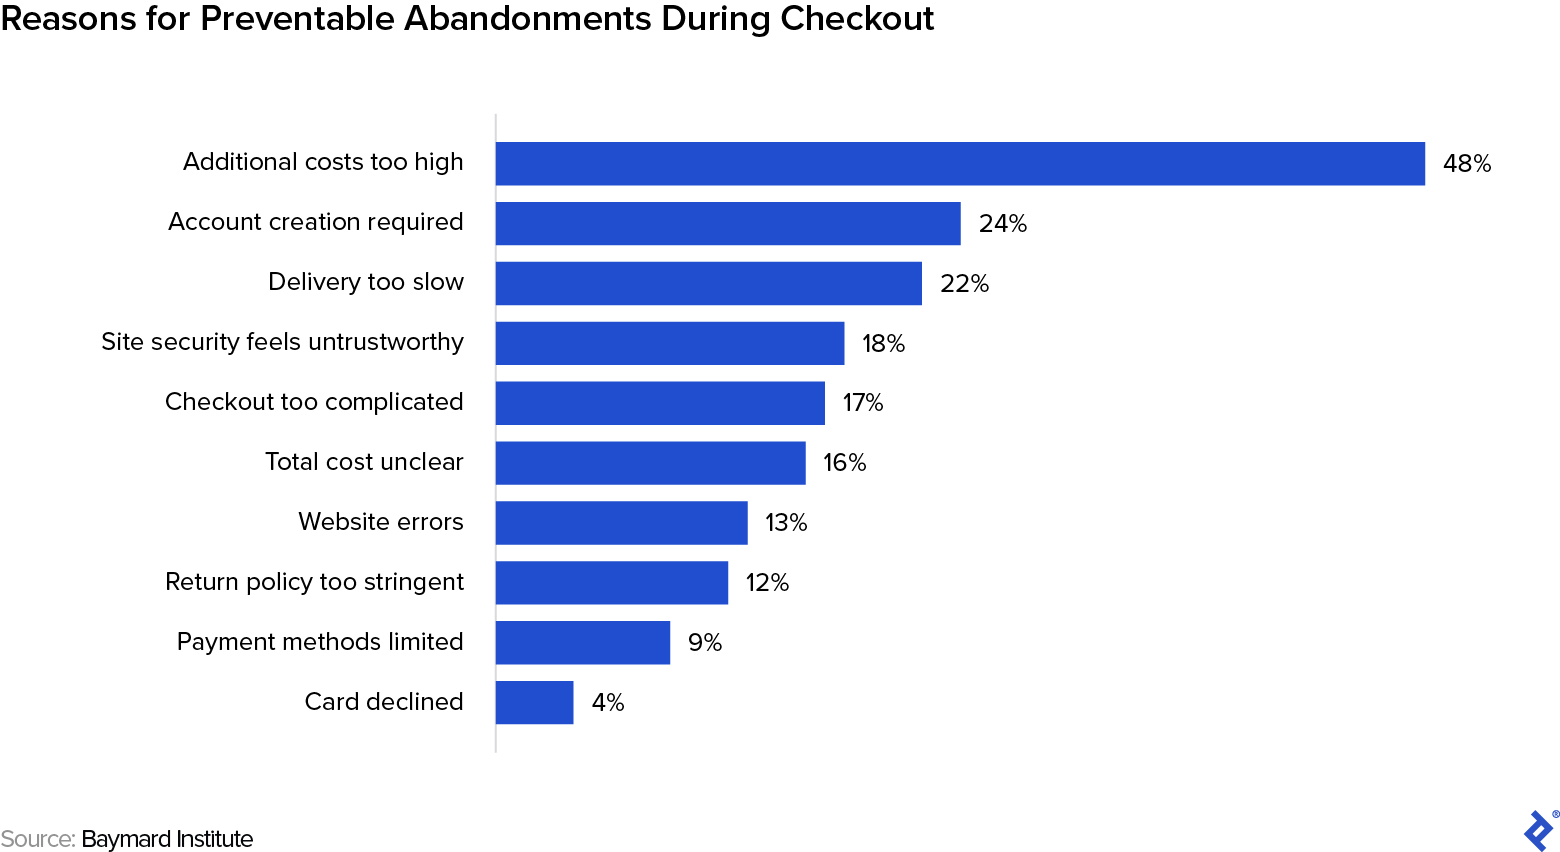 A bar graph showing reasons for preventable cart abandonments during checkout. Values include: Additional costs too high, 48%; Account creation required, 24%; Delivery too slow, 22%; Site security feels untrustworthy, 18%; Checkout too complicated, 17%; Total cost unclear, 16%; Website errors, 13%; Return policy too stringent, 12%; Payment methods limited, 9%; Card declined, 4%.